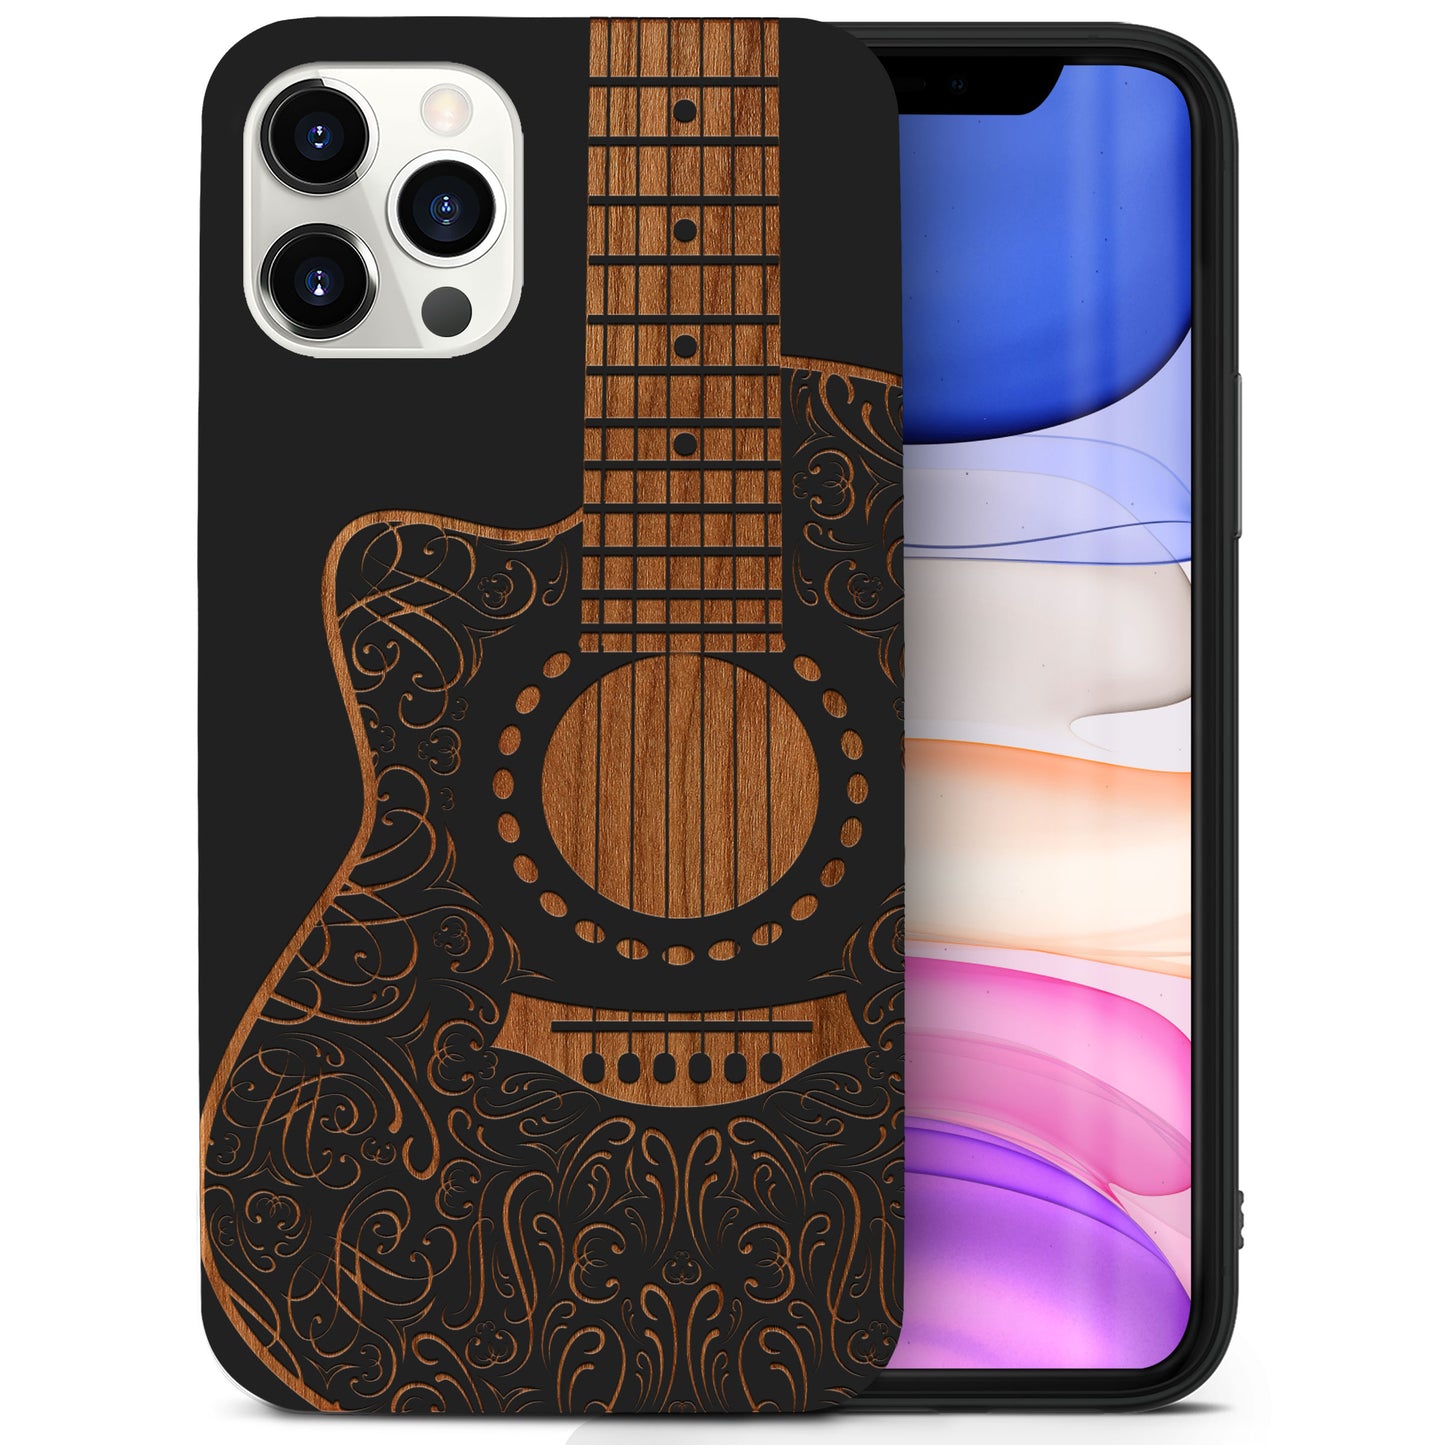 Wooden Cell Phone Case Cover, Laser Engraved case for iPhone & Samsung phone Electro Guitar Design